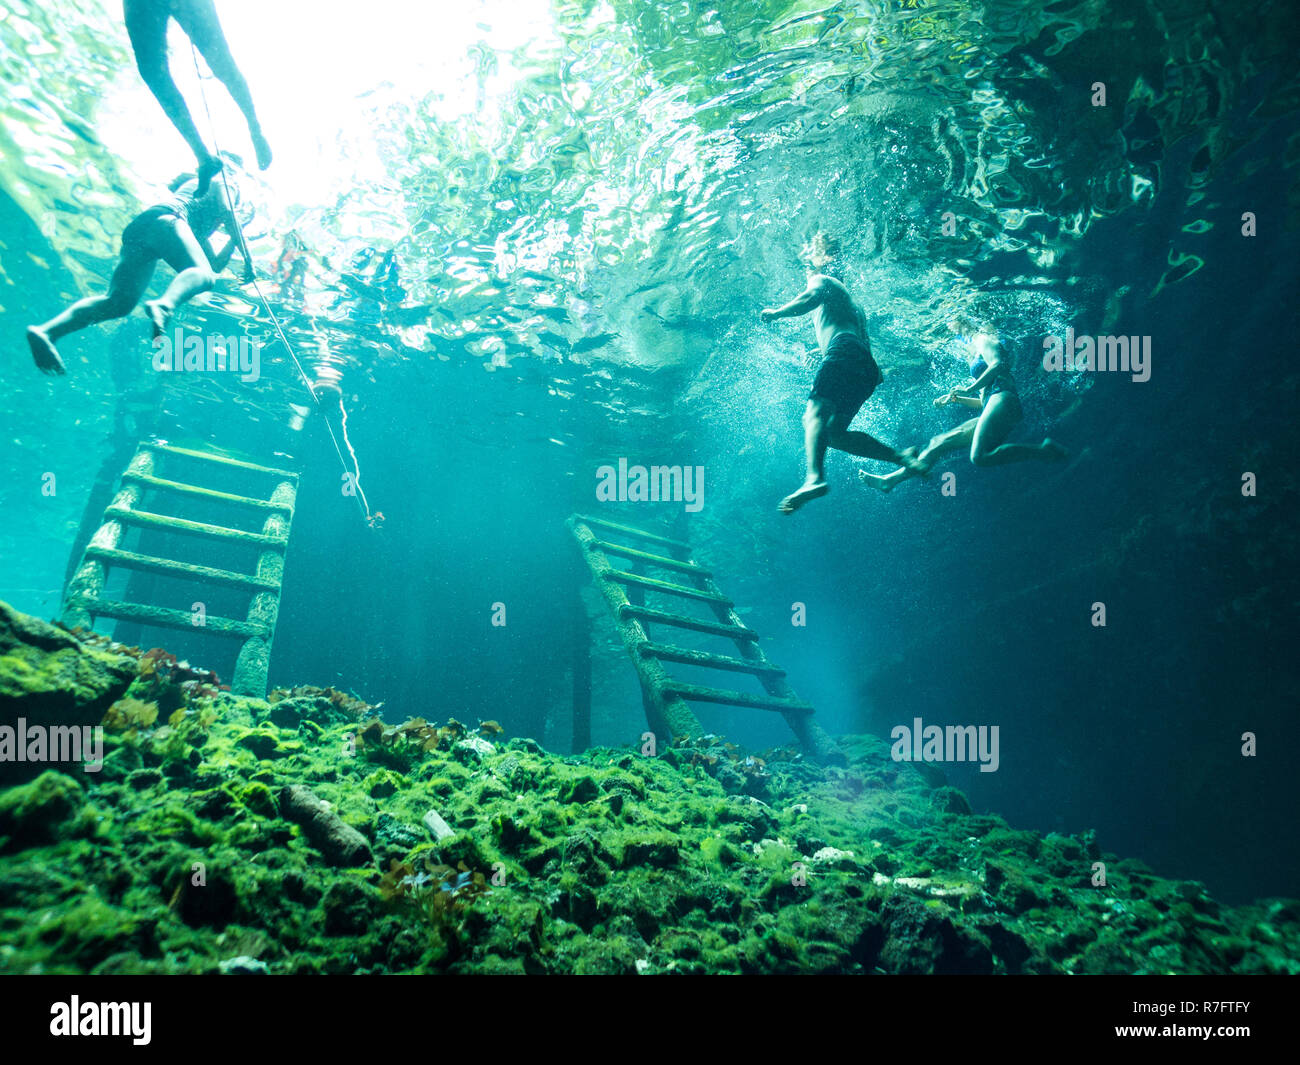 Tourists Snorkeling and Swimming in Gran Cenote - Tulum, Mexico. Underwater Tourism Photo Stock Photo